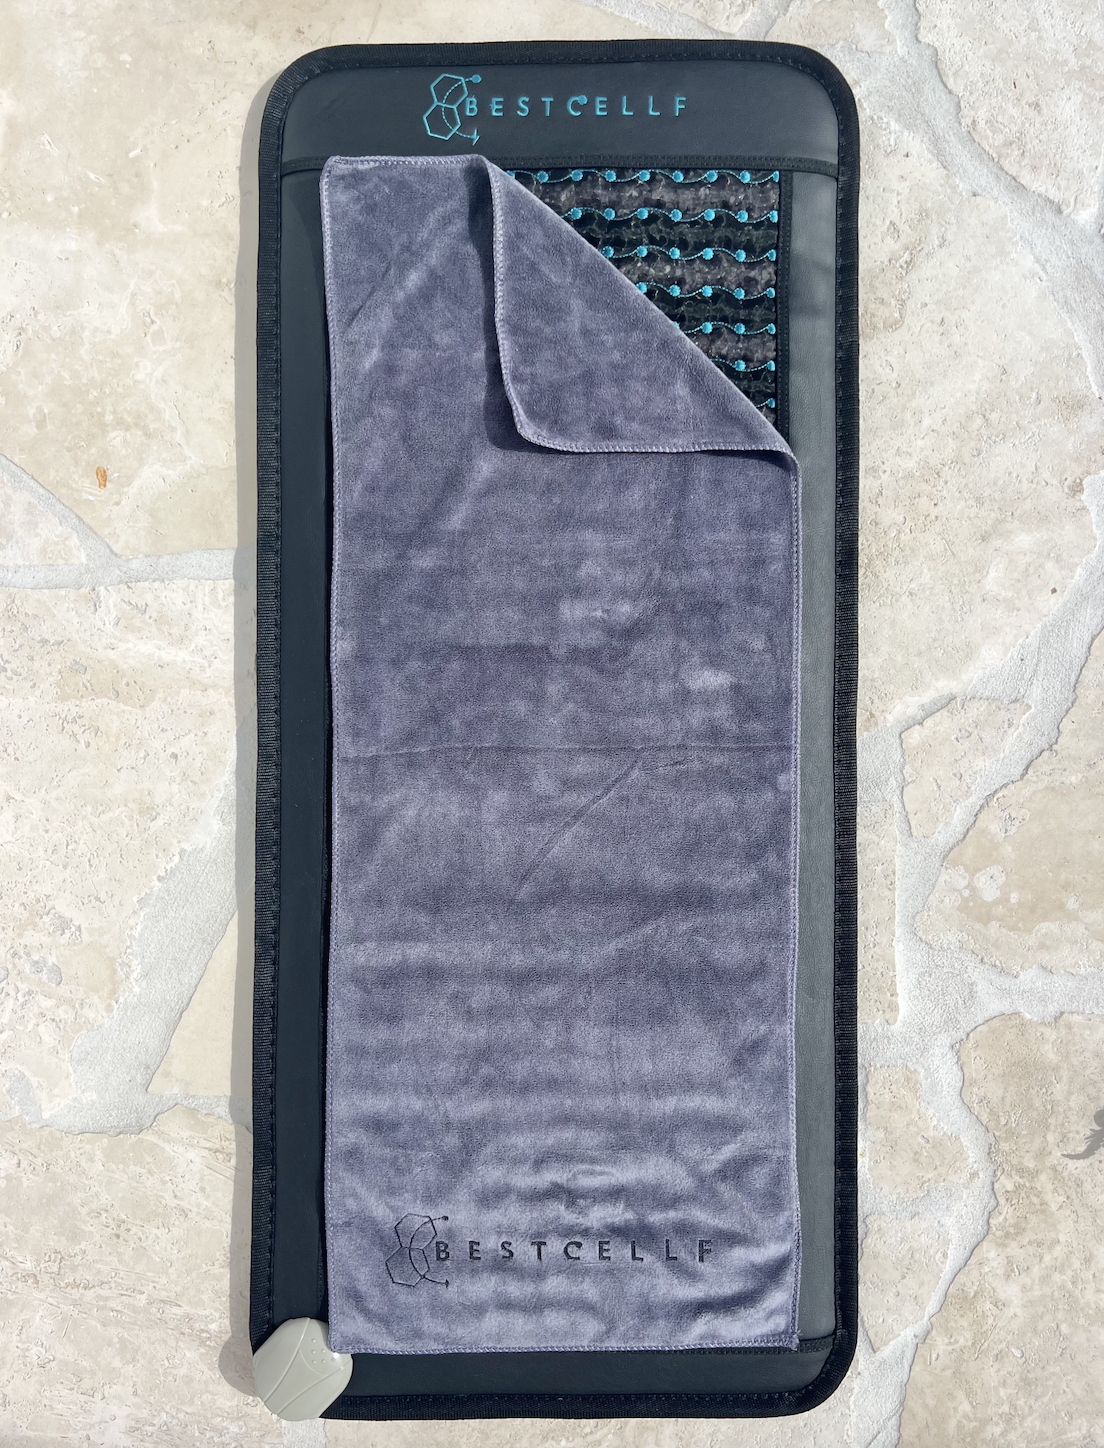 Best Cellf Charcoal Microfibre Towel Small